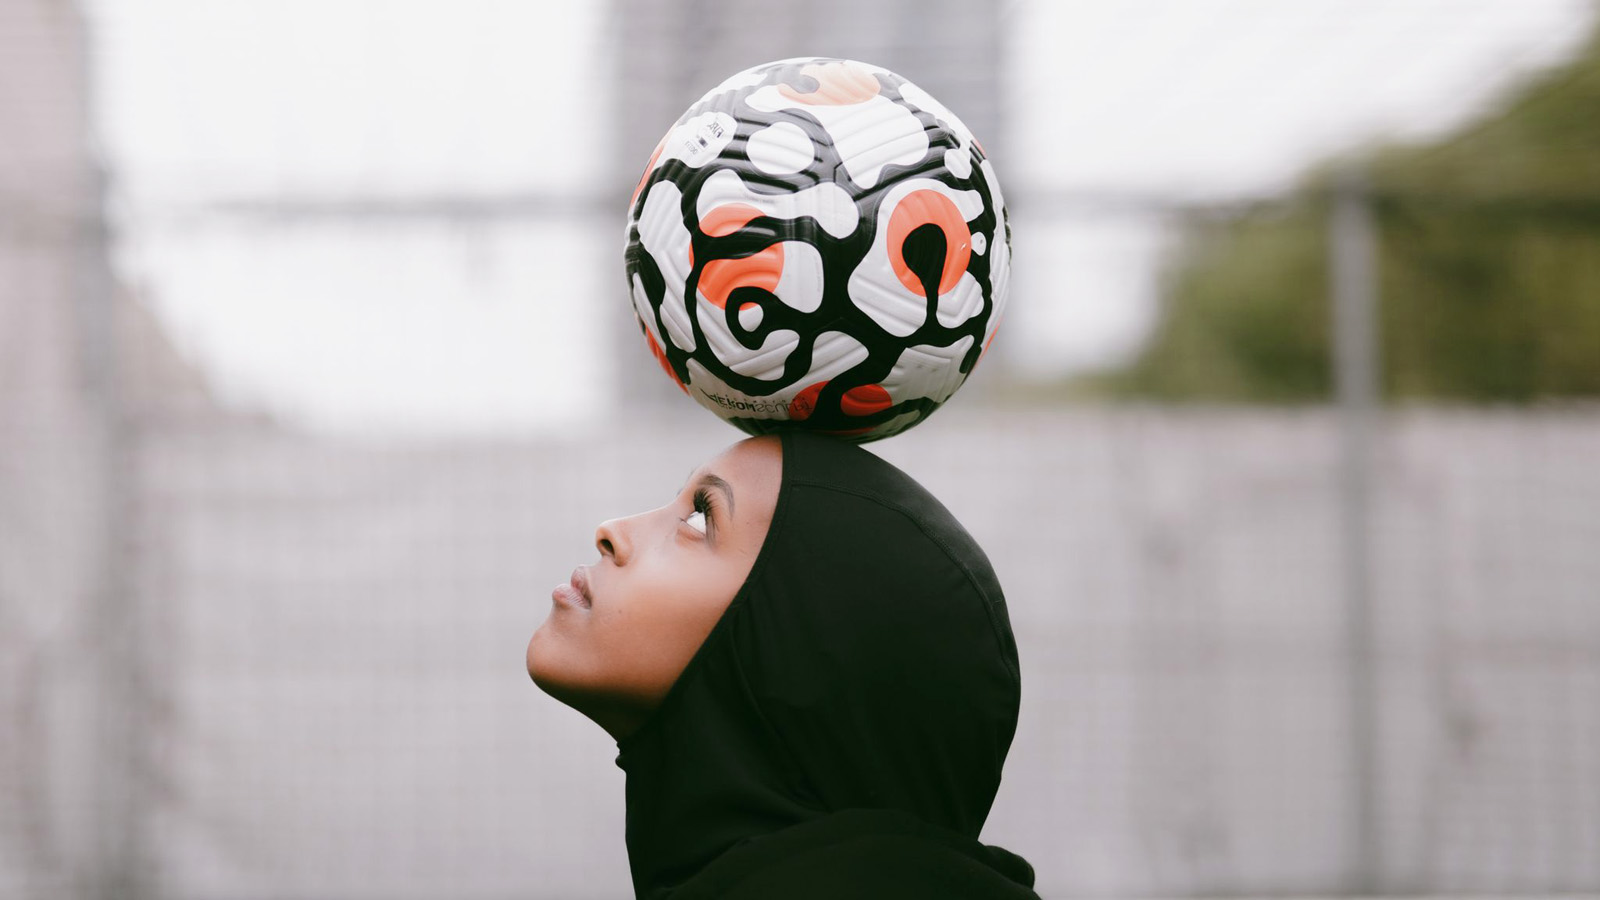 Women’s Football in Countries with Gender Stereotypes and Cultural Restrictions